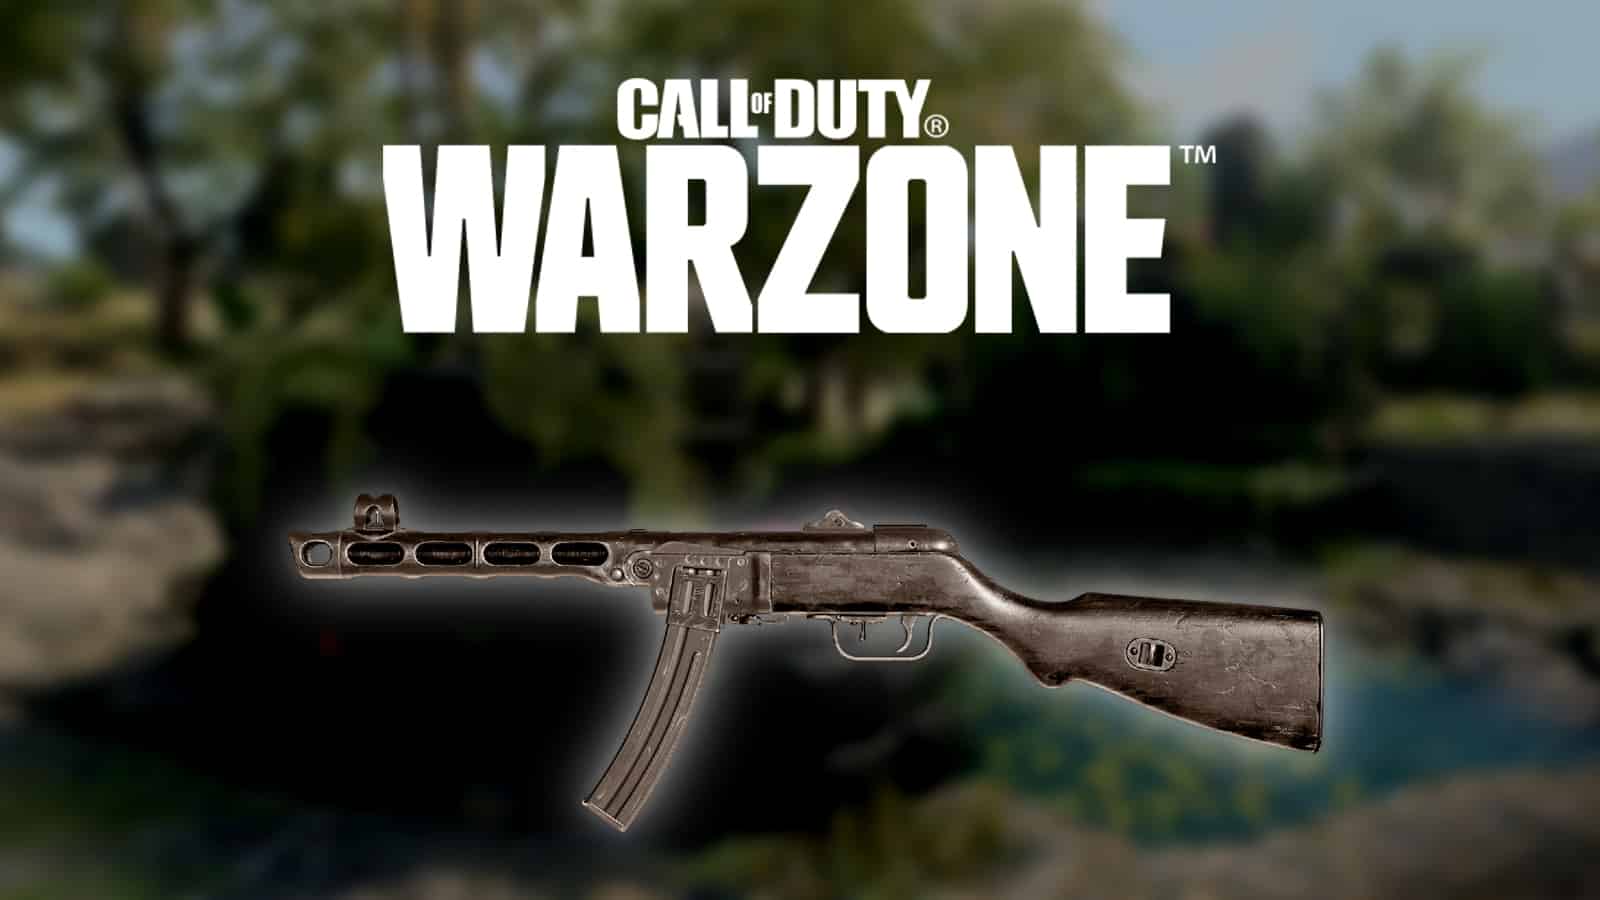 warzone ppsh with warzone logo